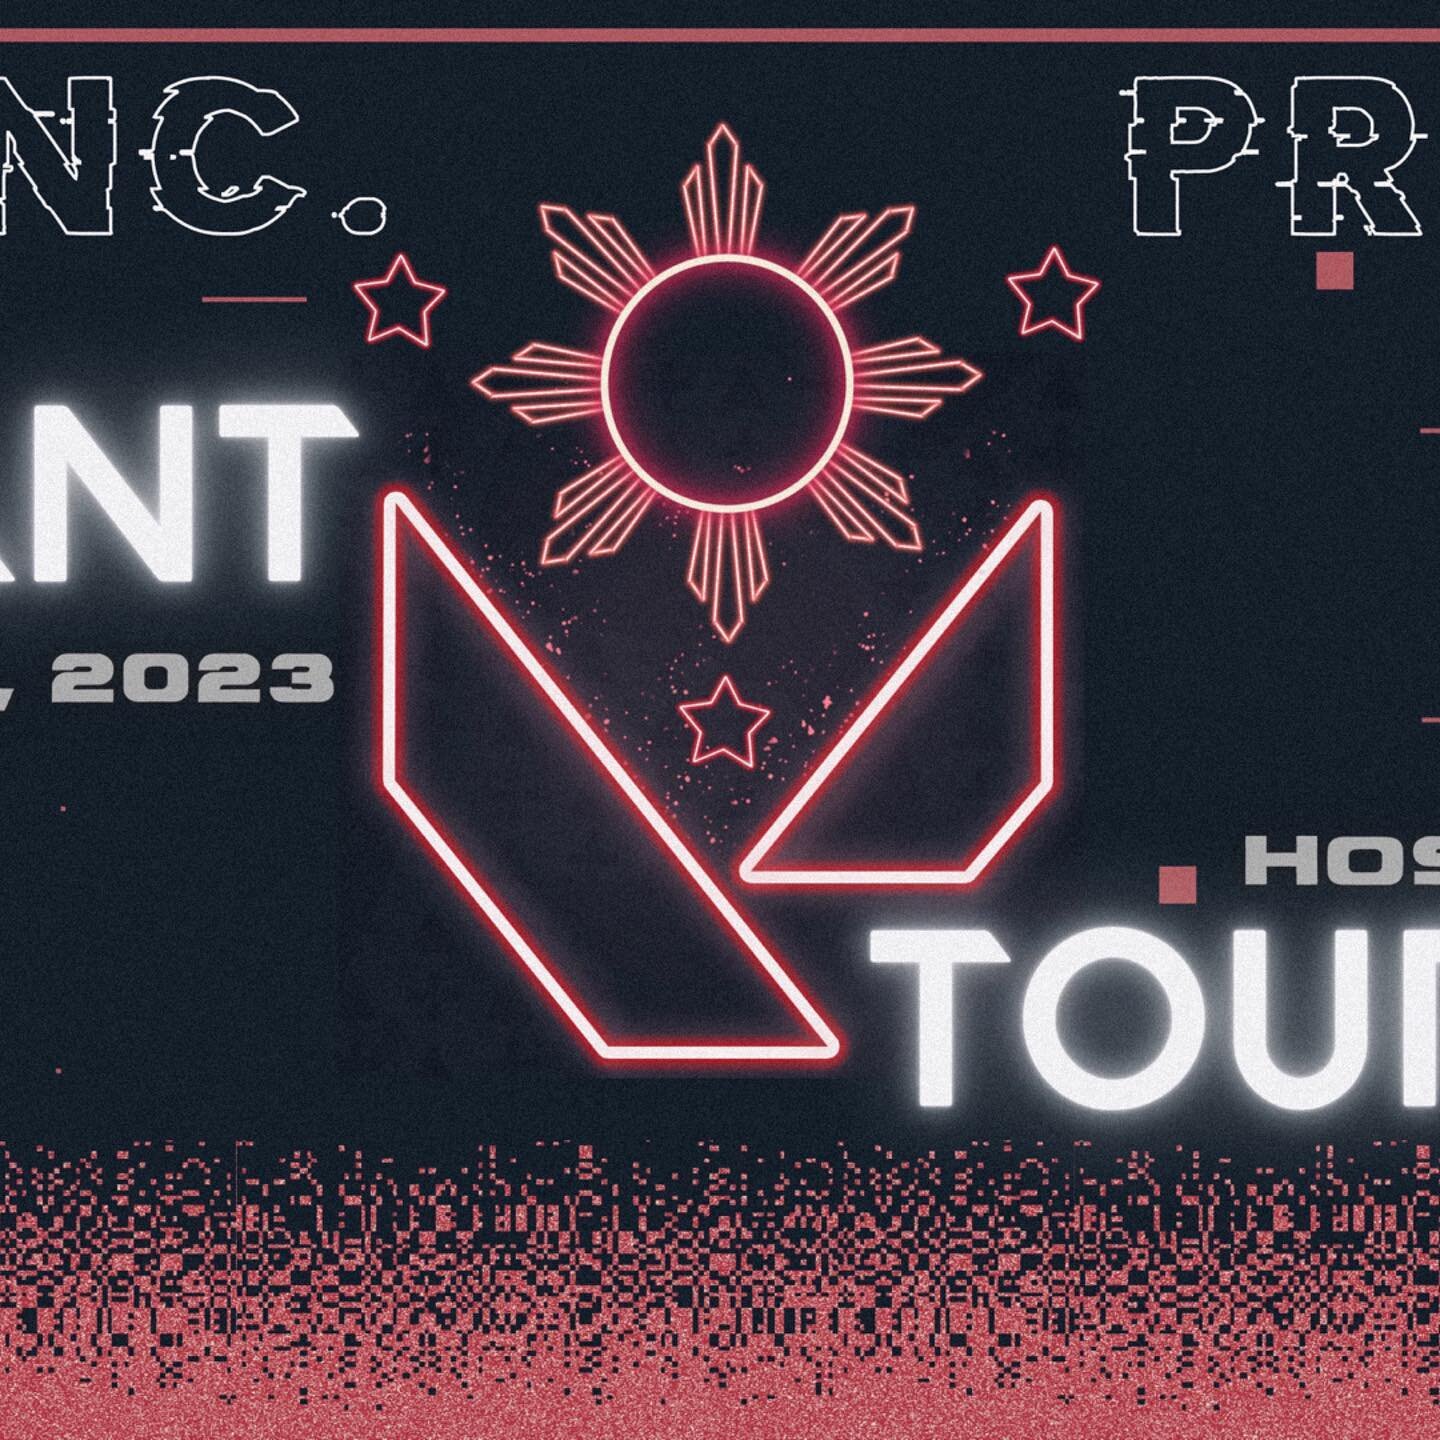 FIND, Inc. is excited to announce our Valorant video game tournament! 👾Represent your school/organization and claim the title of being a part of the most Radiant District in FIND 🏆 This is the time to showcase your precise aim and top tier strategi